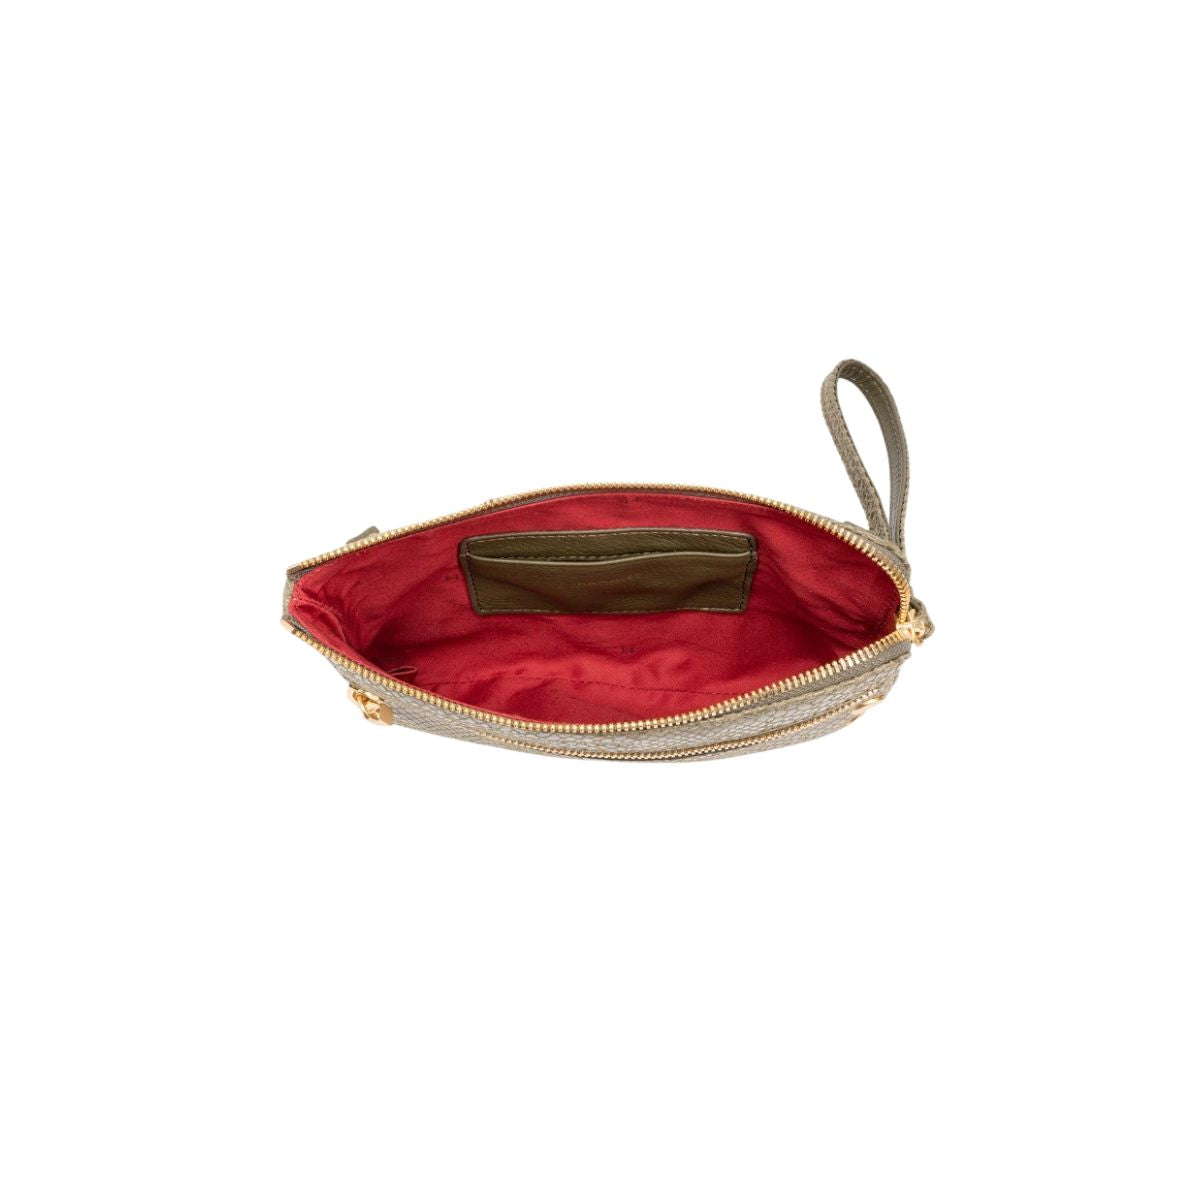 Hammitt Nash Small Clutch in Bistro Green Snake & Brushed Gold